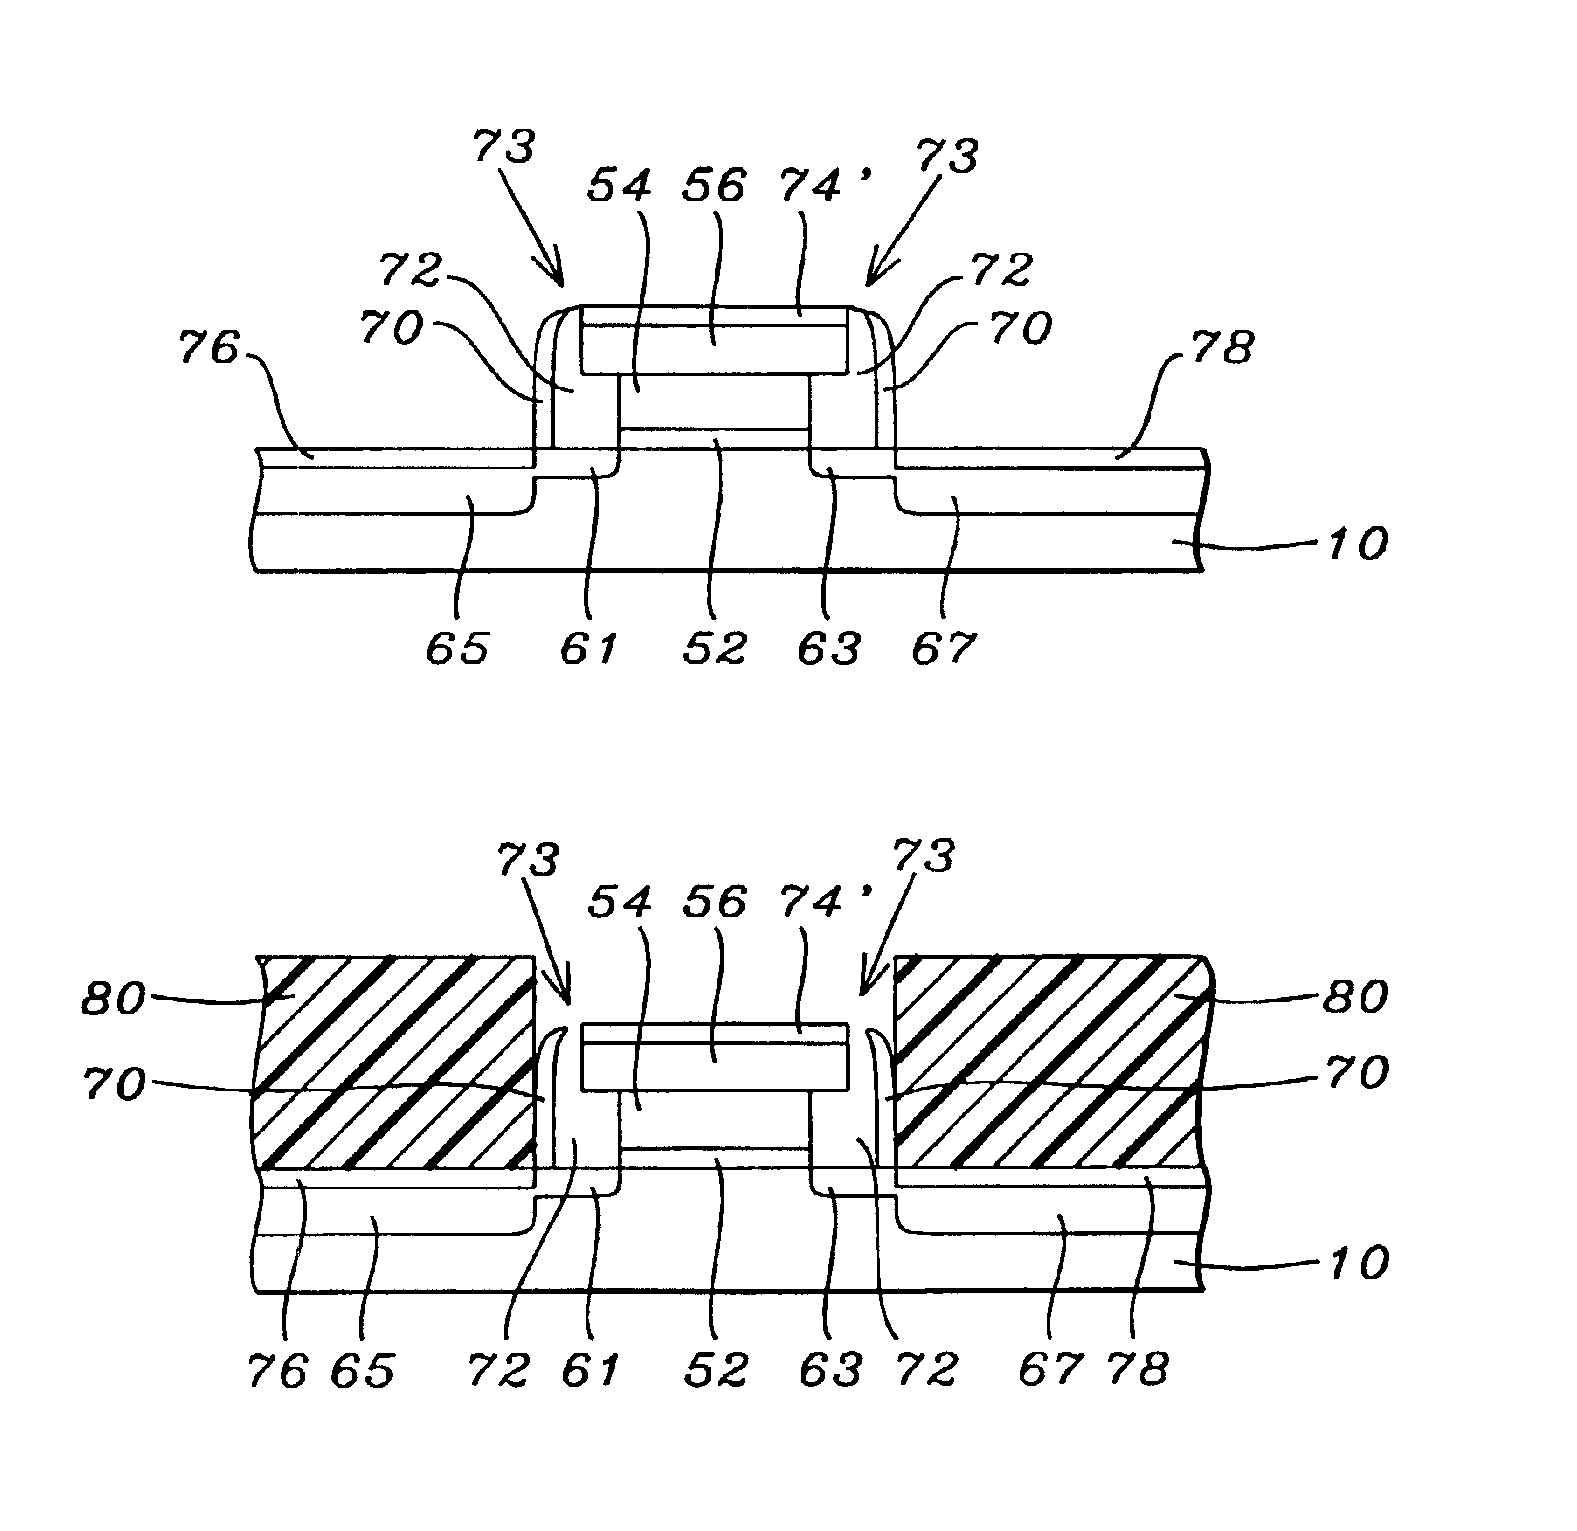 Gate stack for high performance sub-micron CMOS devices